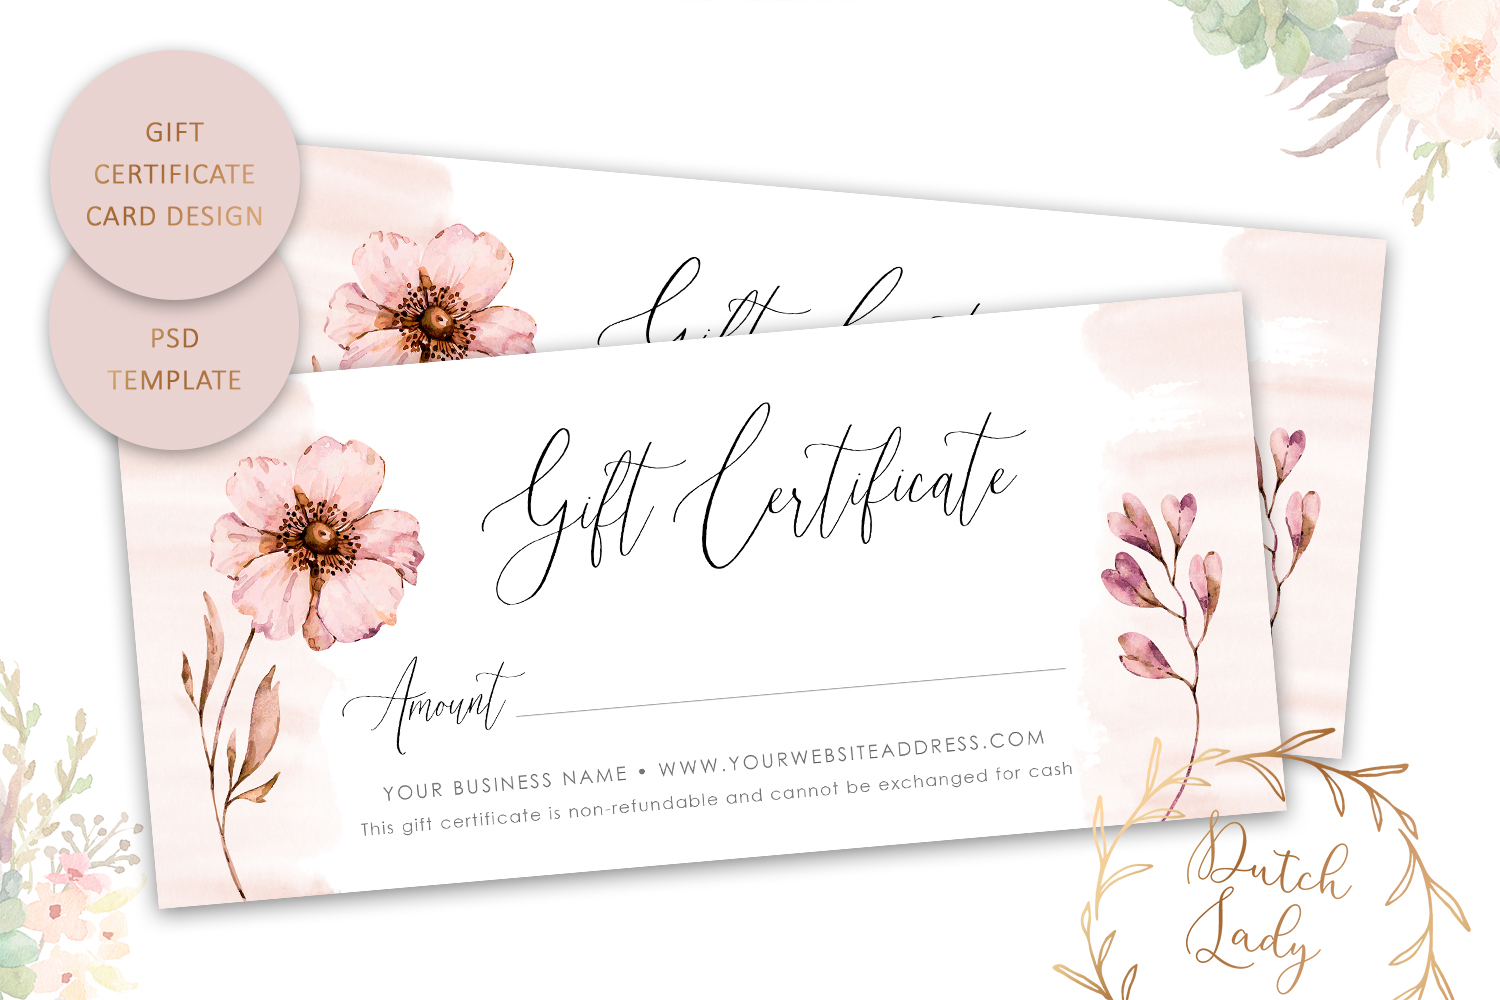 Gift Certificate Template Single Side #10 Within Gift Certificate Template Photoshop